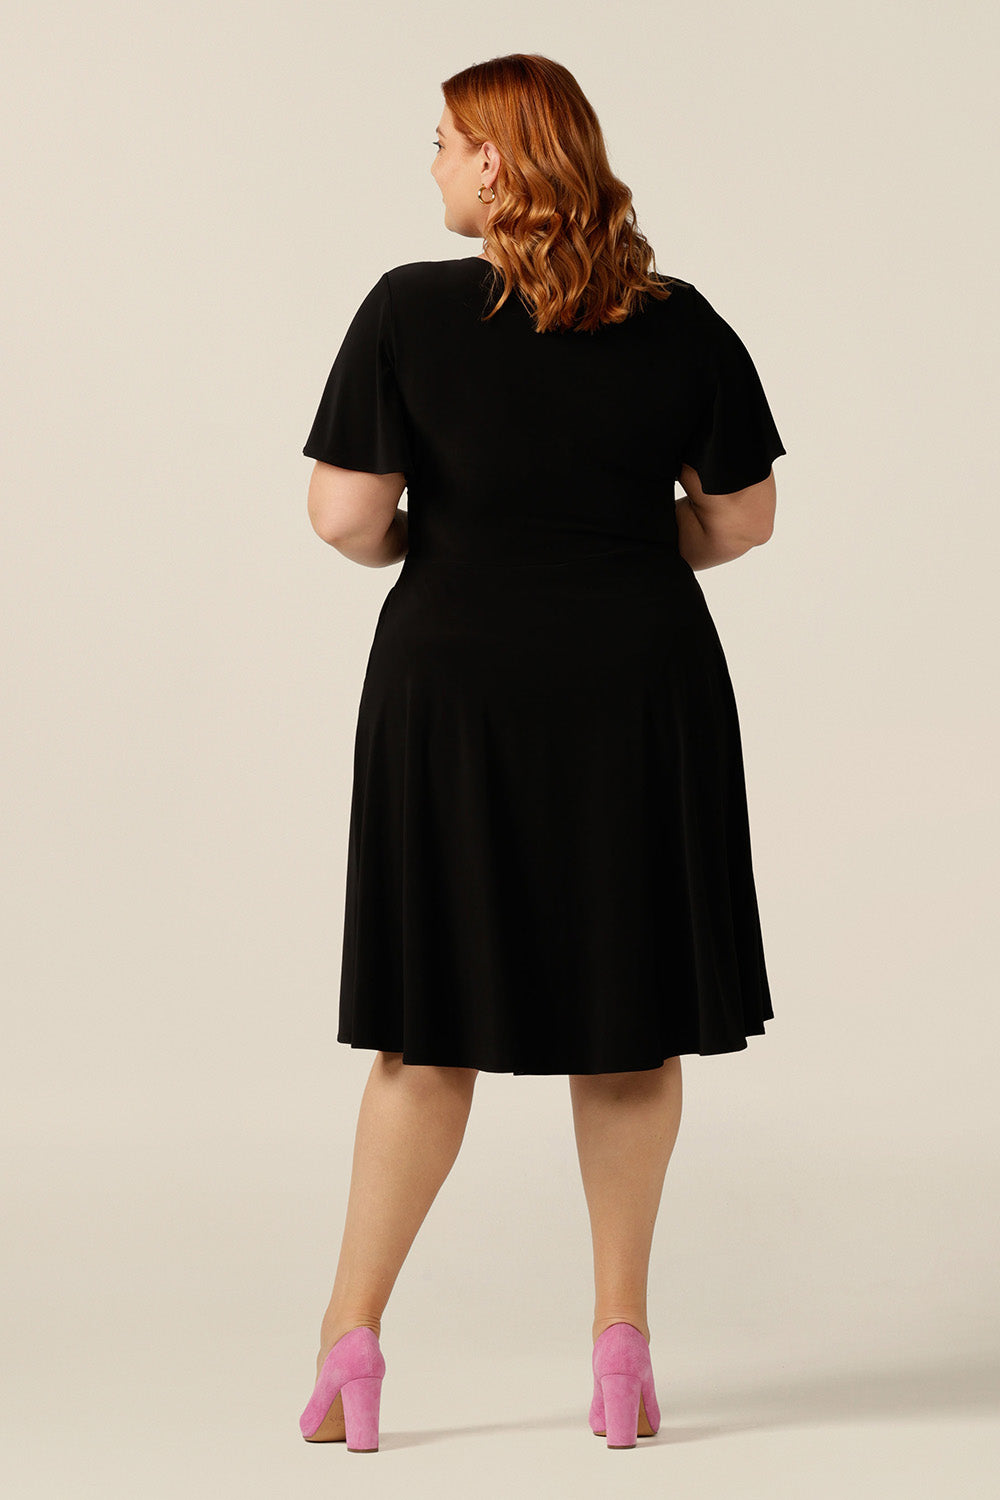 size 18, plus size woman wearing a reversible fixed wrap dress in black jersey. Worn with the wrap front forwards, she styles as elegant jersey little black dress. Featuring short flutter sleeves, a knee length skirt and pockets, this dress can be worn for work wear or going-out dress style. Made in Australia by women's clothing label, Leina and Fleur